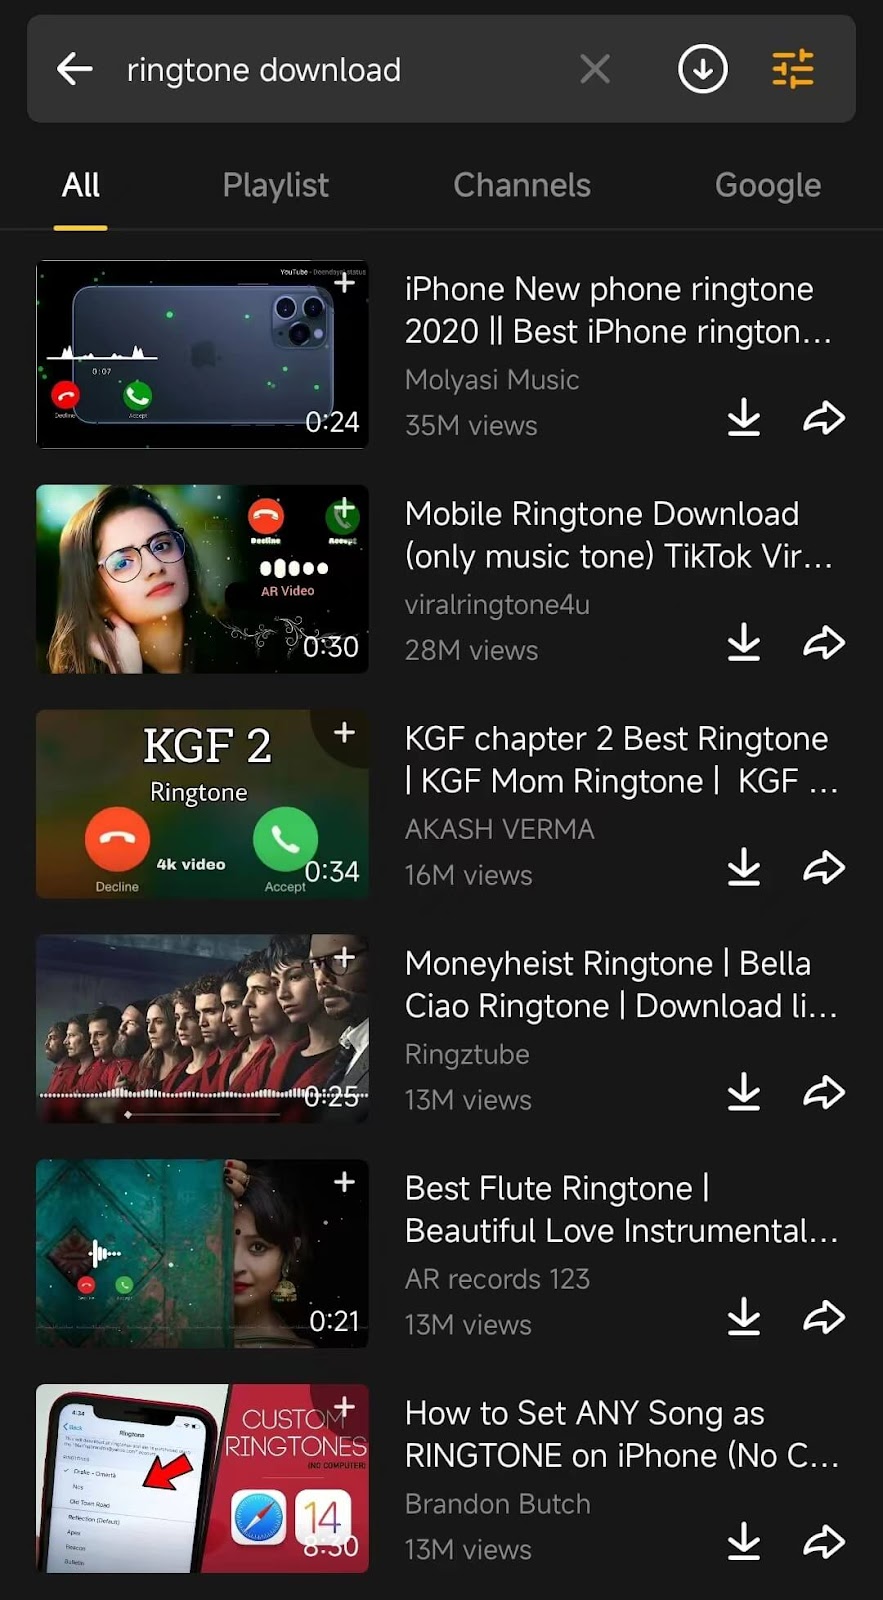 Search for your bgm ringtone download mp3